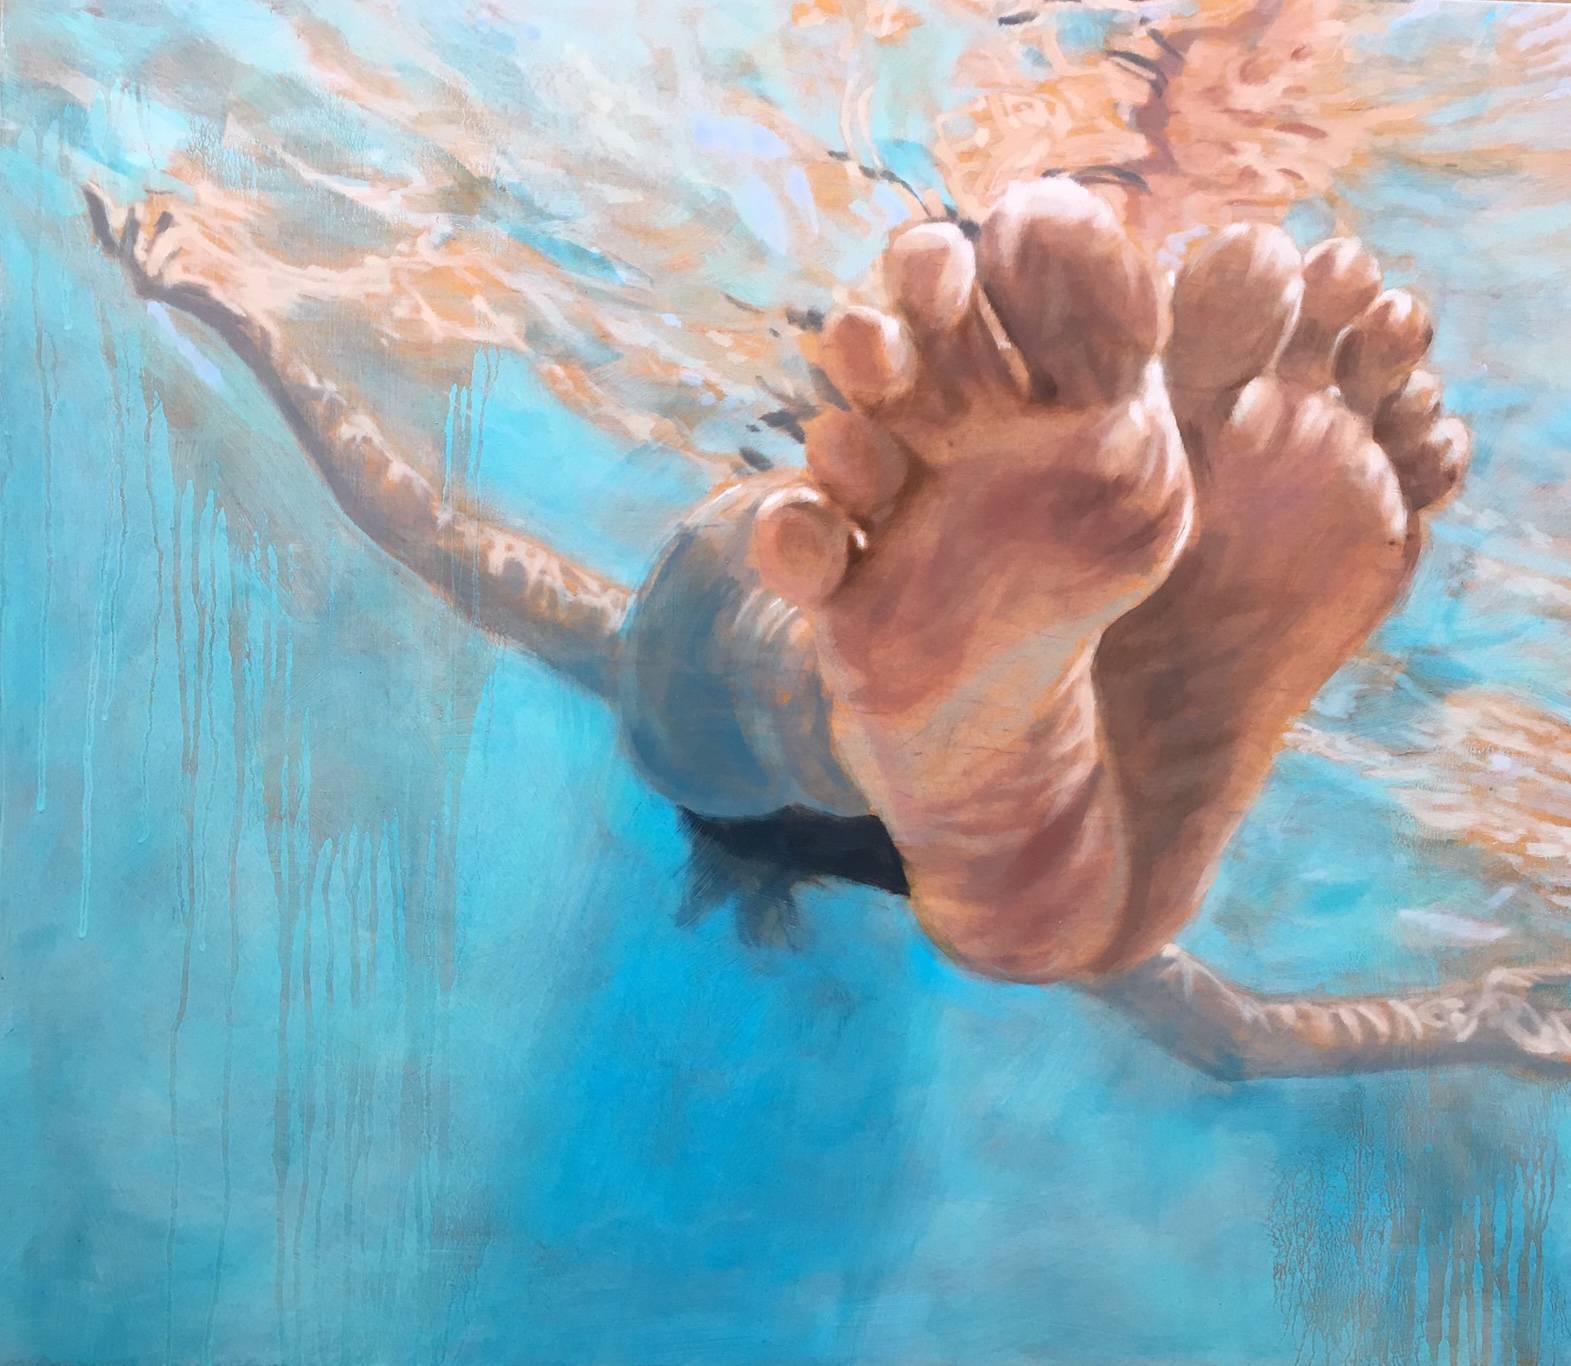 Carol Bennett Figurative Painting - "Hang Time" Oil painting of feet floating in a blue pool 